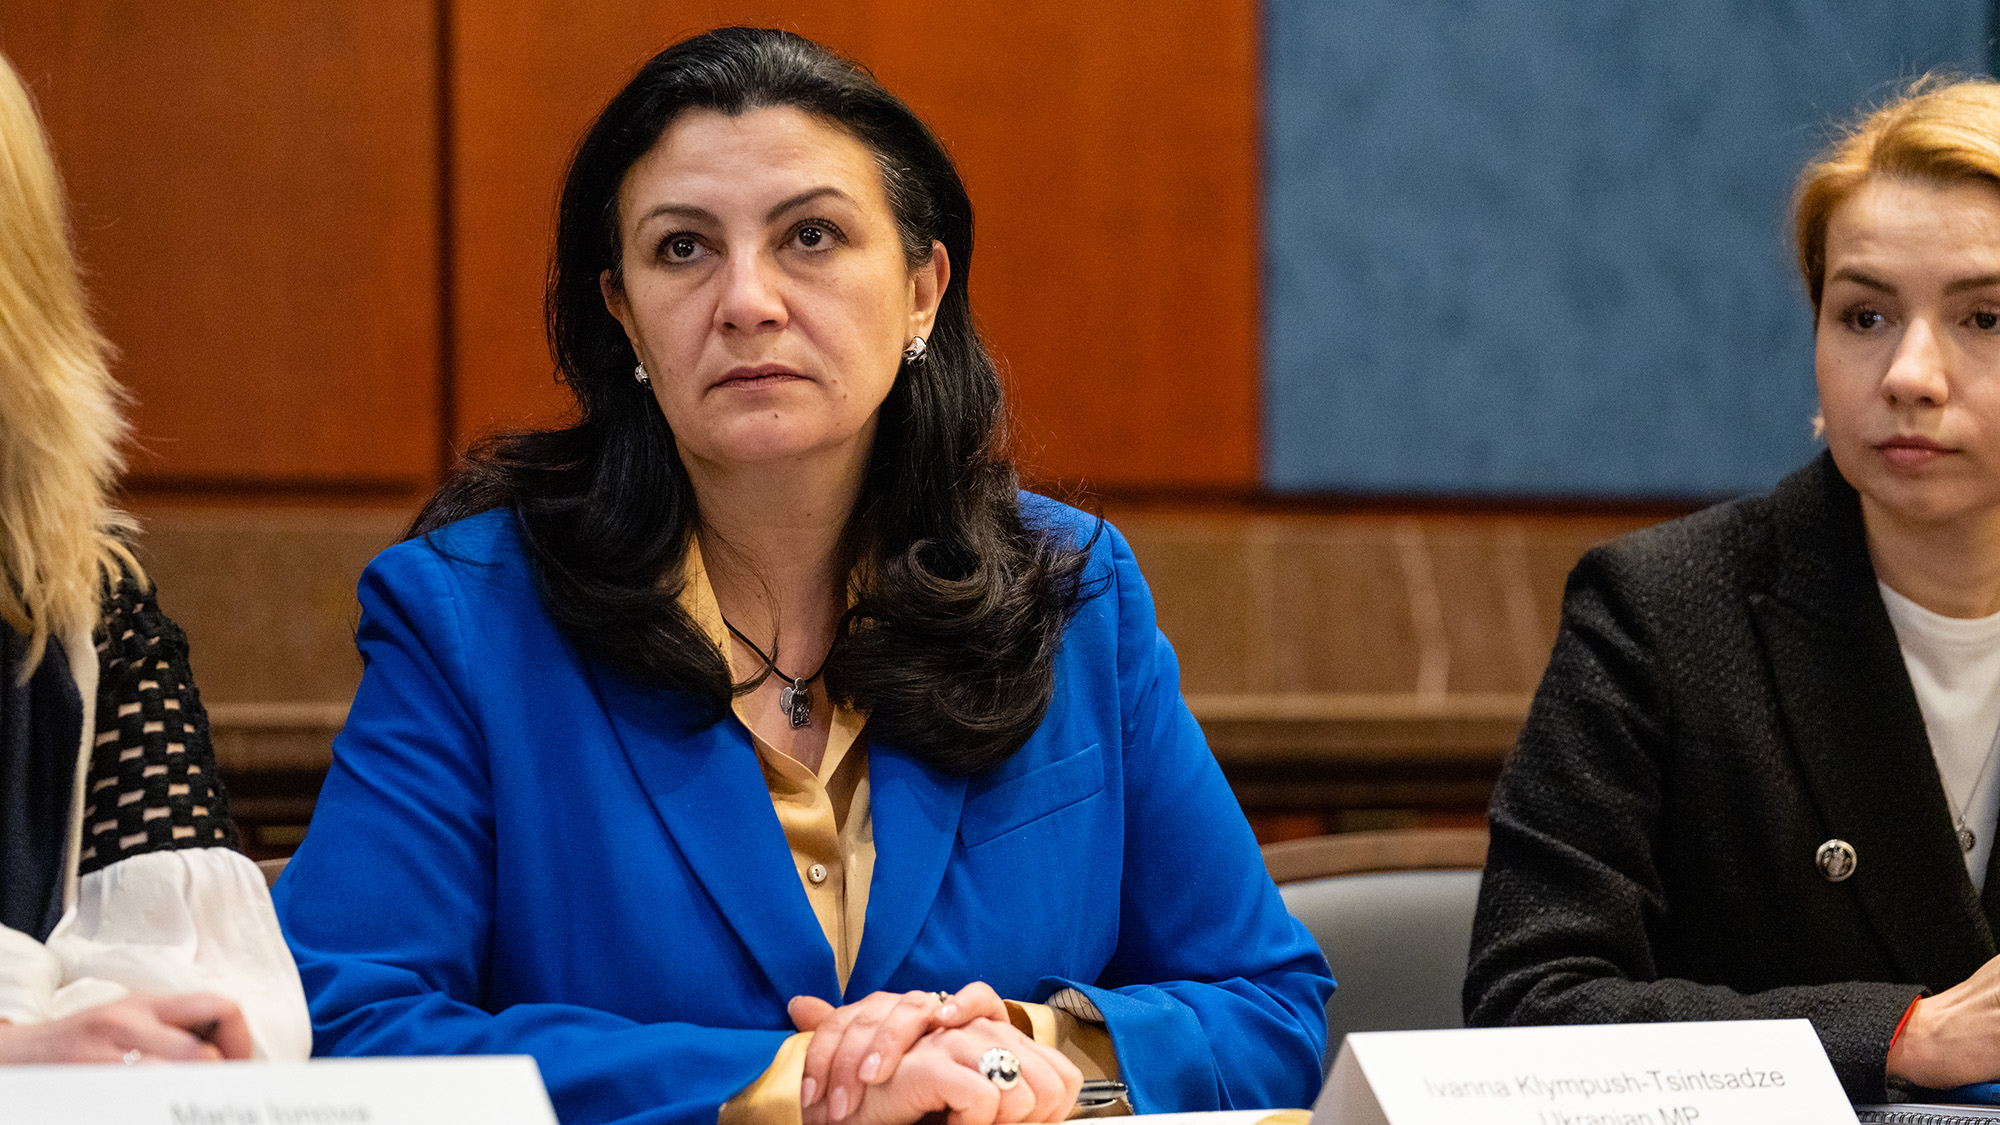 Ivanna Klympush-Tsintsadze, a member of the Ukrainian Parliament, listens during a meeting between the Senate Ukraine Caucus and members of the Ukrainian Parliament and Polish Parliament at the US Capitol on Wednesday, March 30.